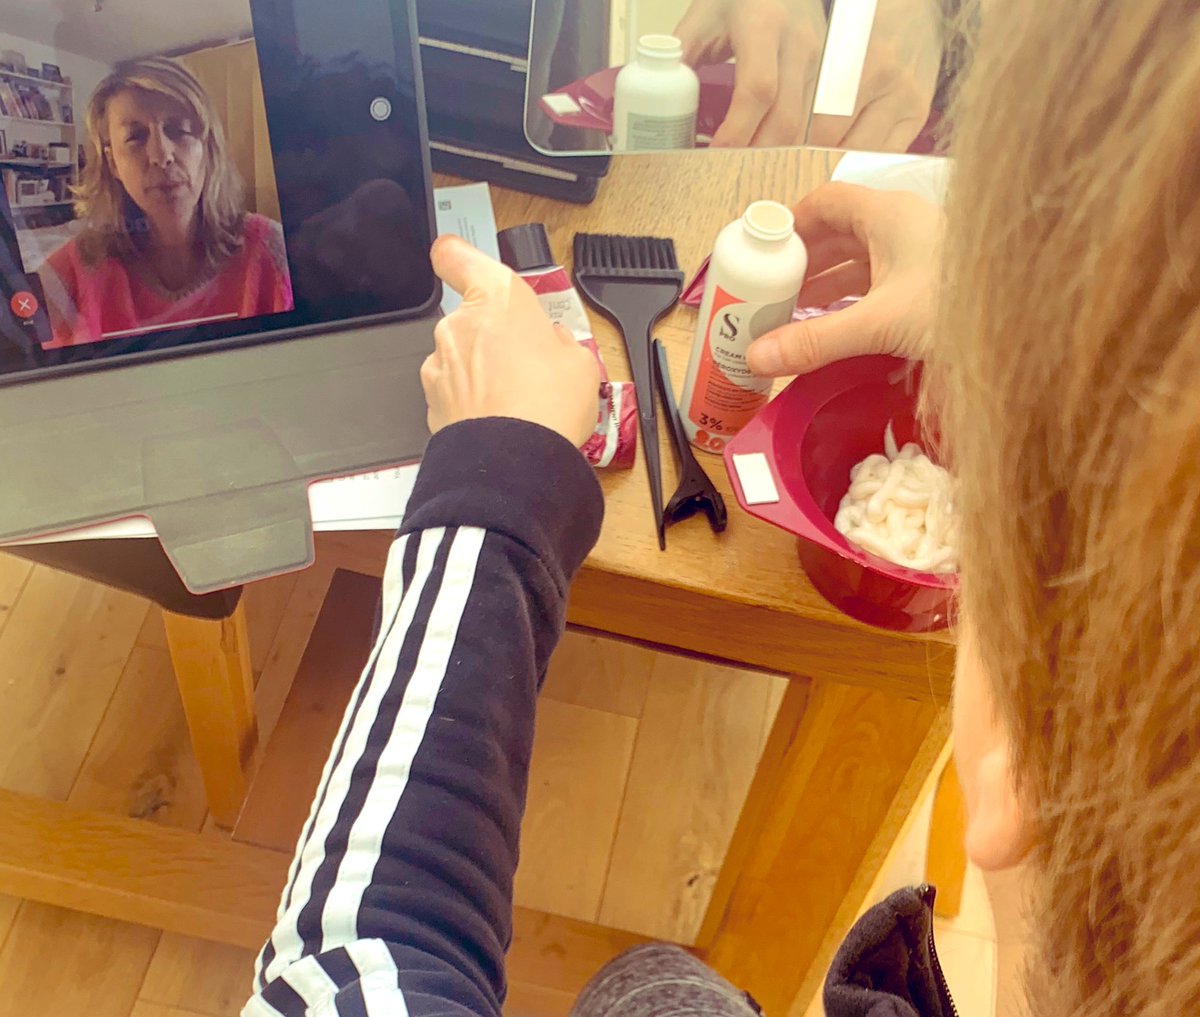 And lo, I’ve been stood down in favour of a video call with trusted hair stylist Julie McGuire